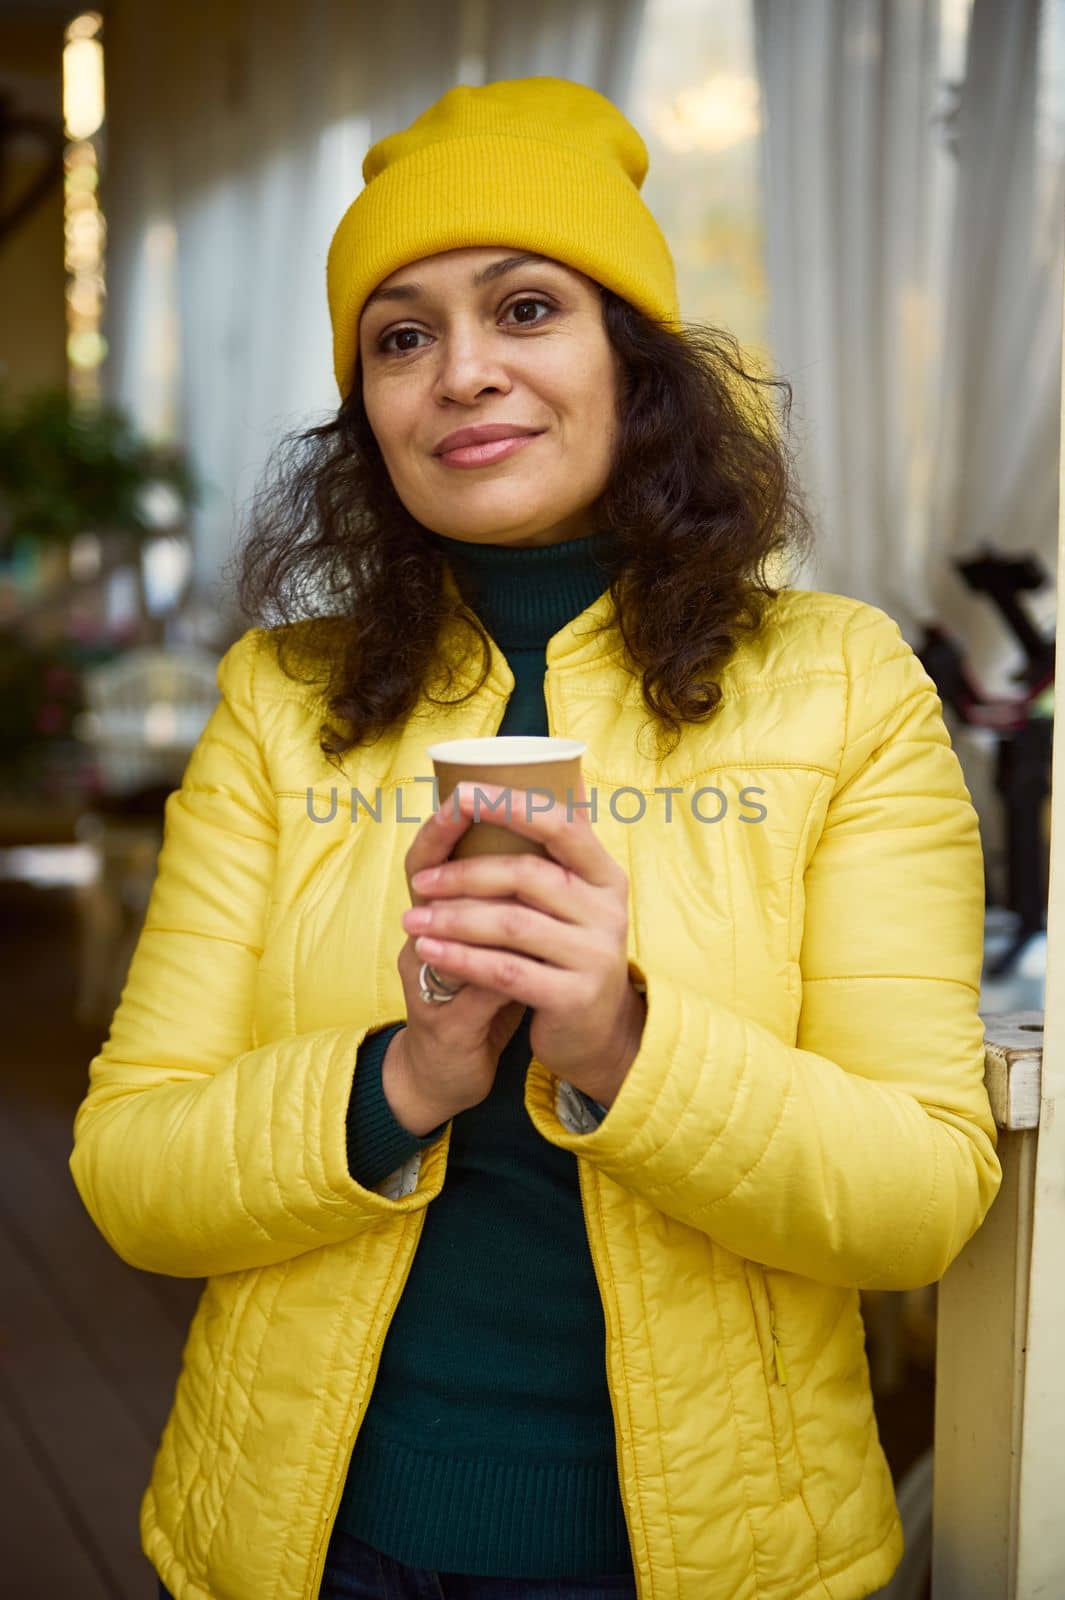 Confident portrait of a delighted attractive Middle-Eastern curly brunette woman, dressed in green sweater, yellow hat and jacket, warming her hands with a hot takeaway coffee in disposable paper mug